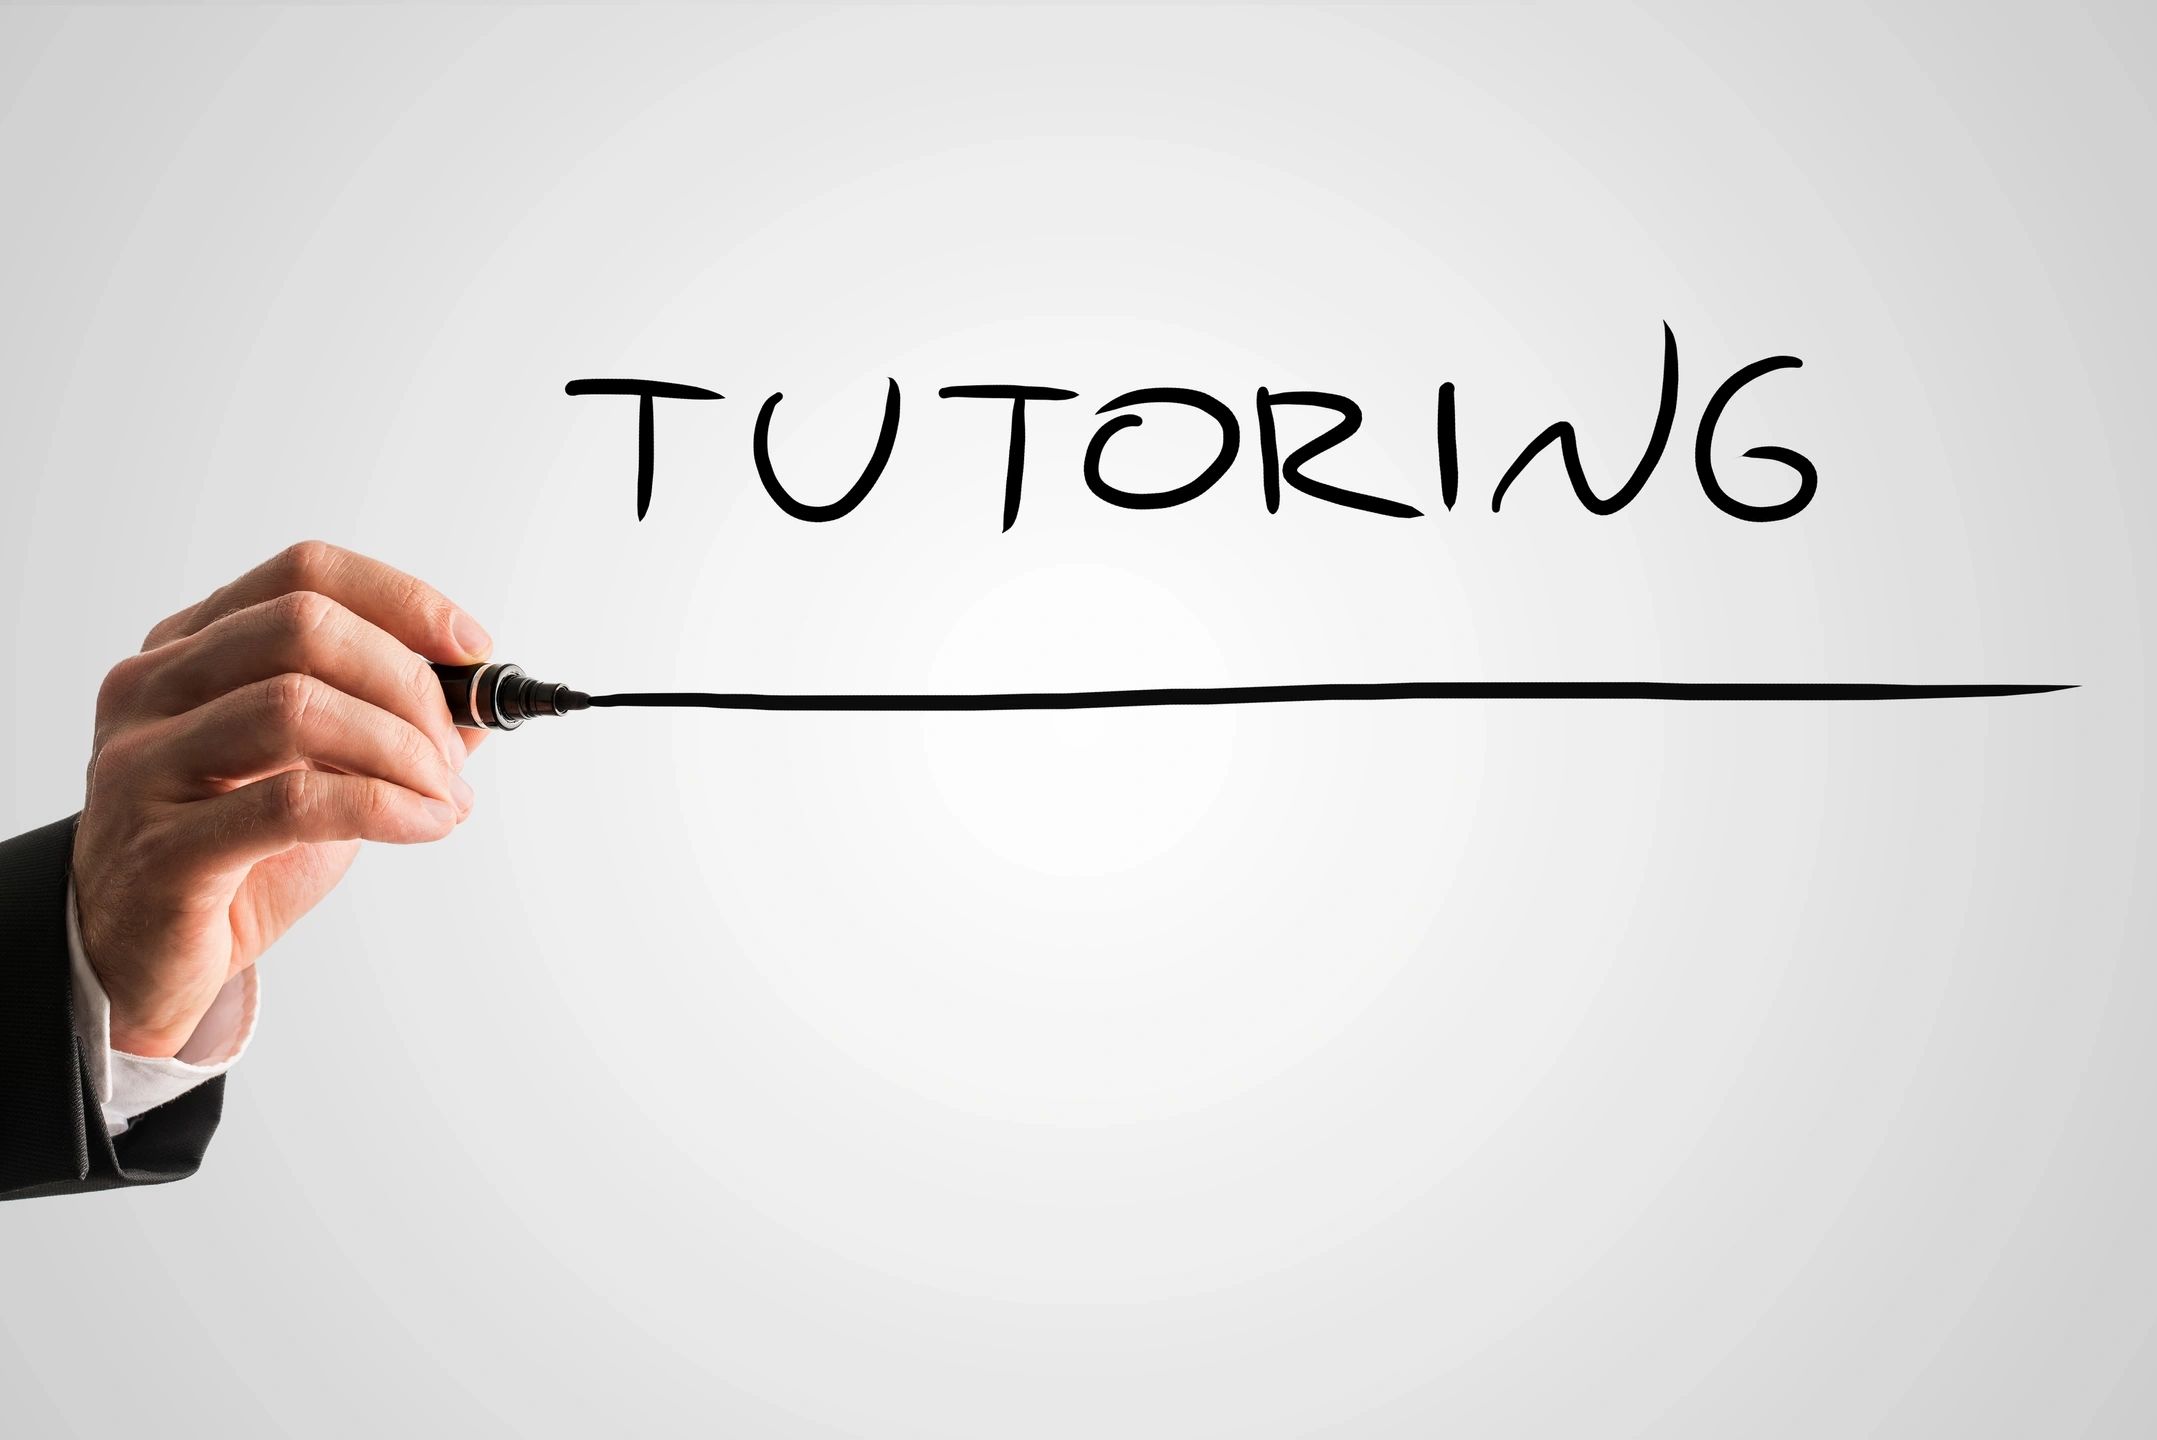 Saraswati home tuitions provides best home tutoring services in mohali, chandigarh & panchkula nearb